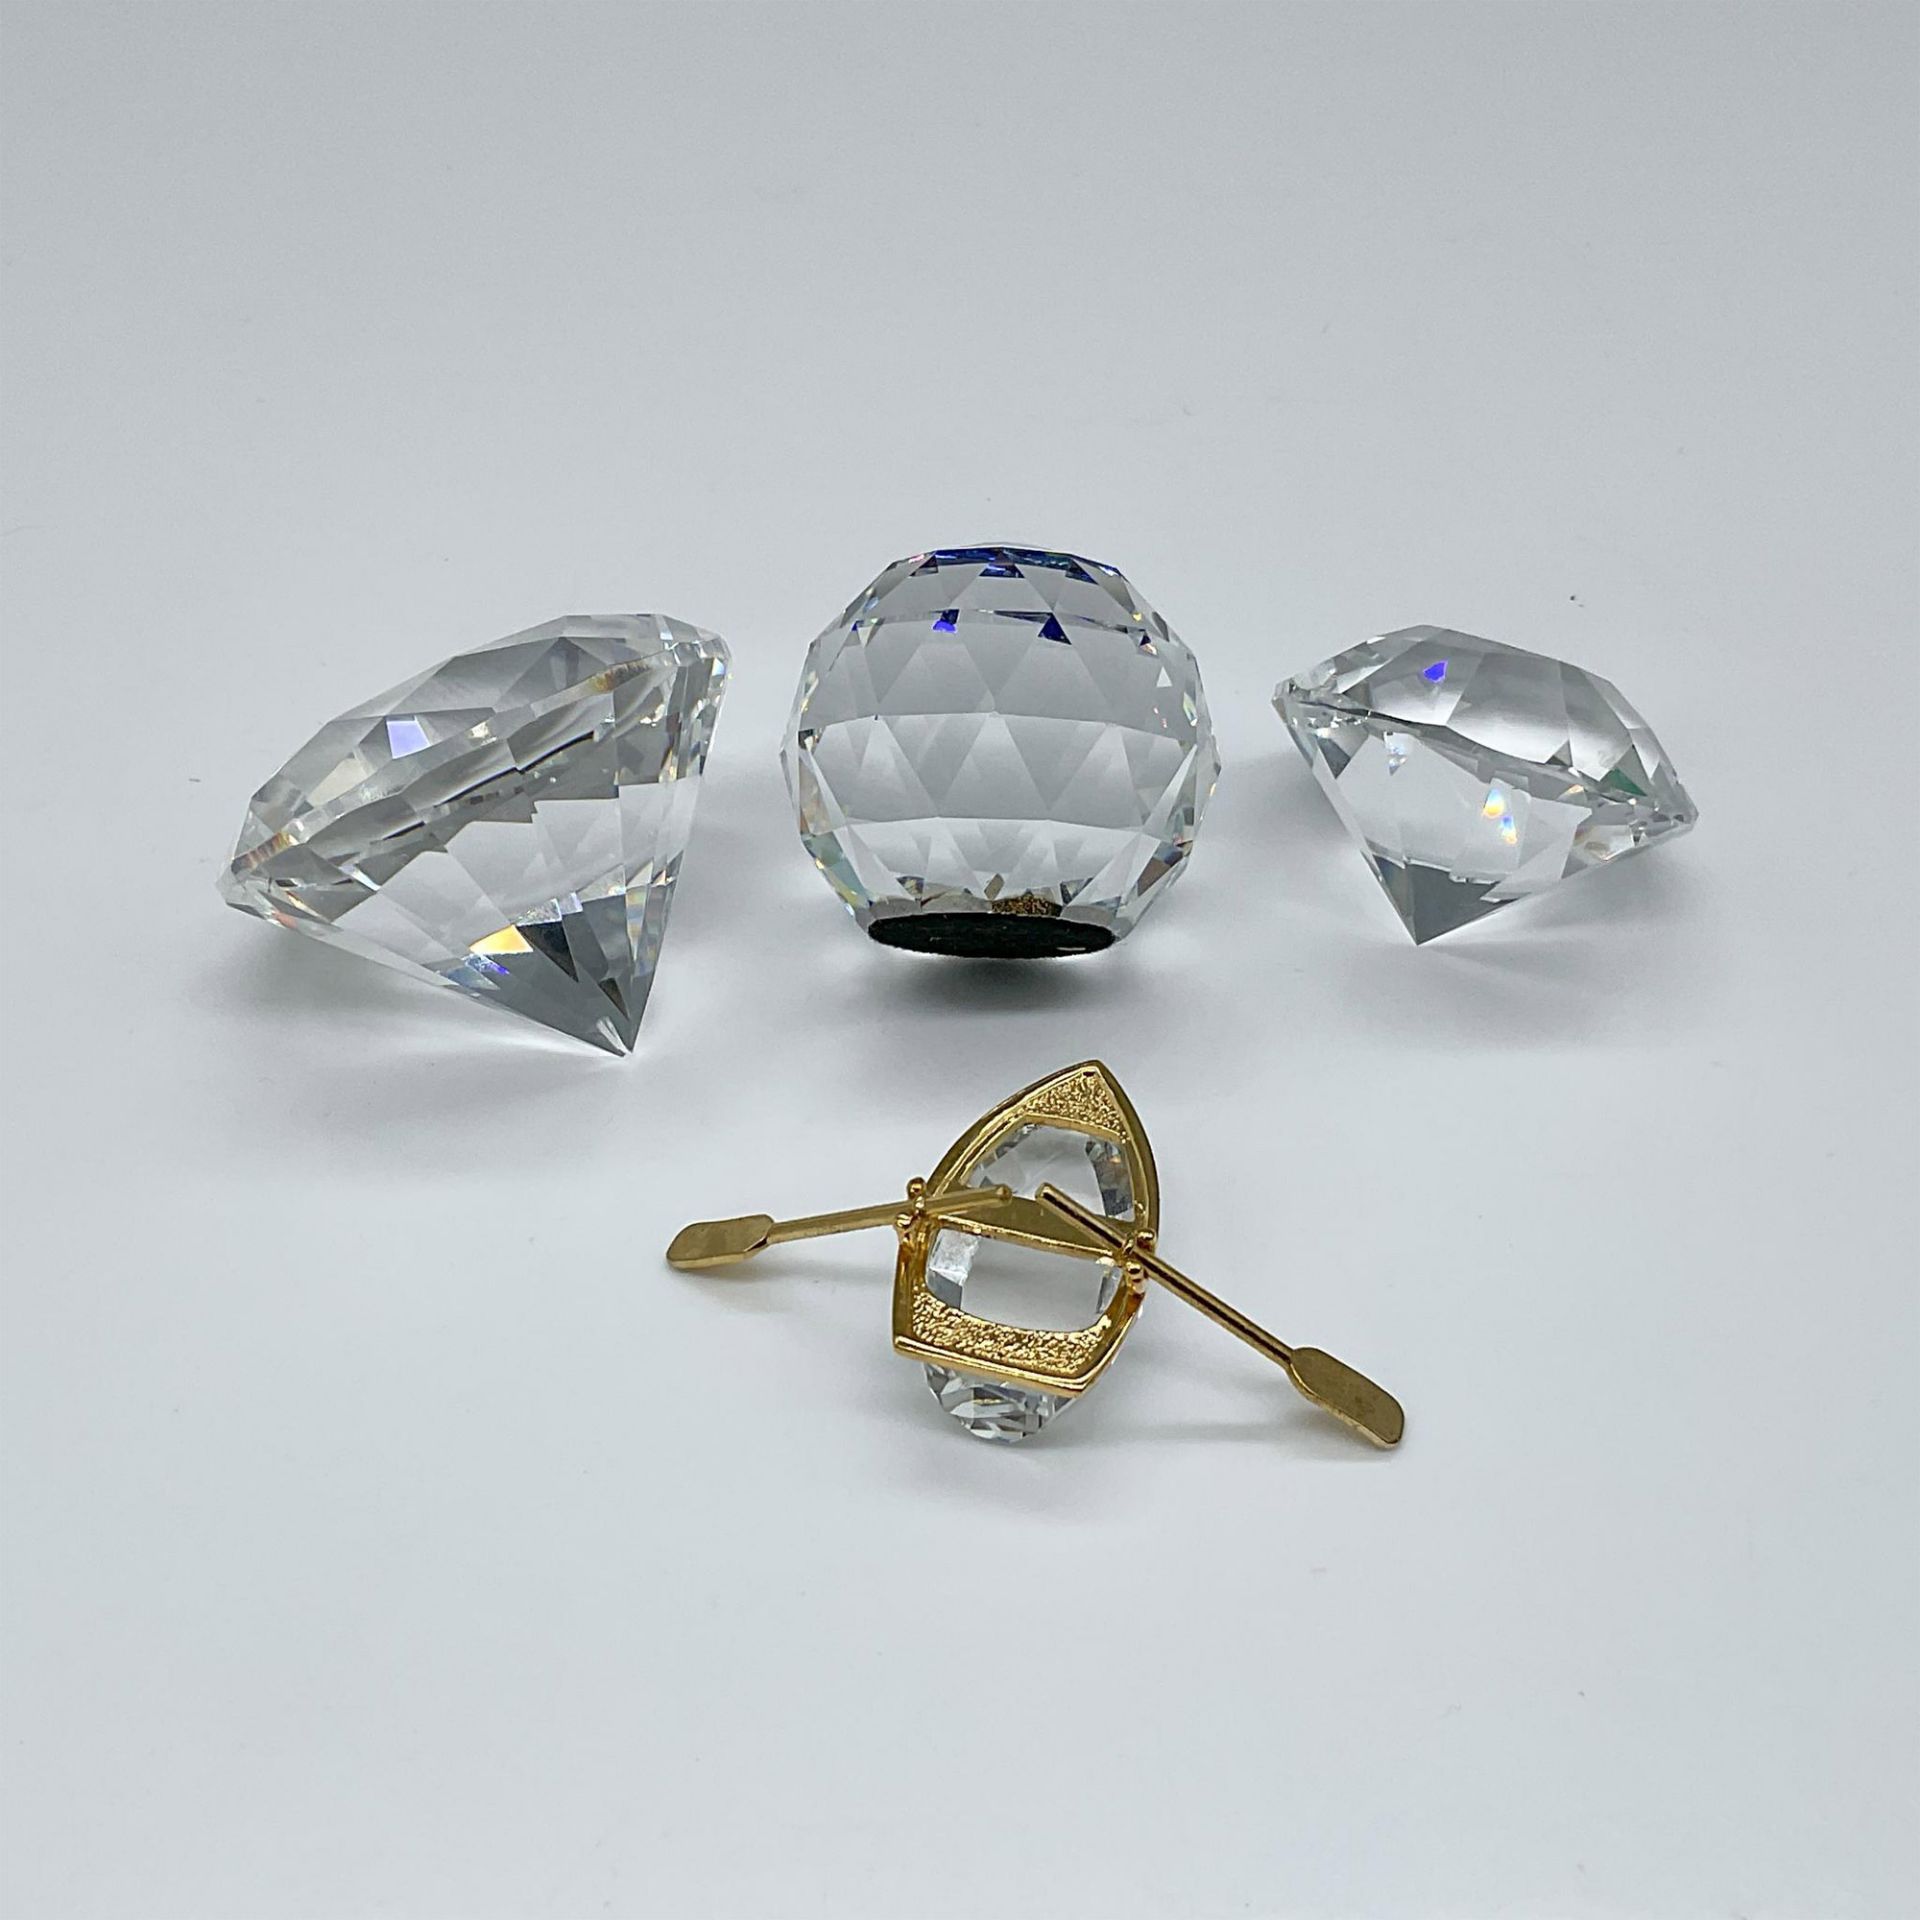 4pc Swarovski Crystal Grouping, Paperweights and Rowboat - Image 2 of 4